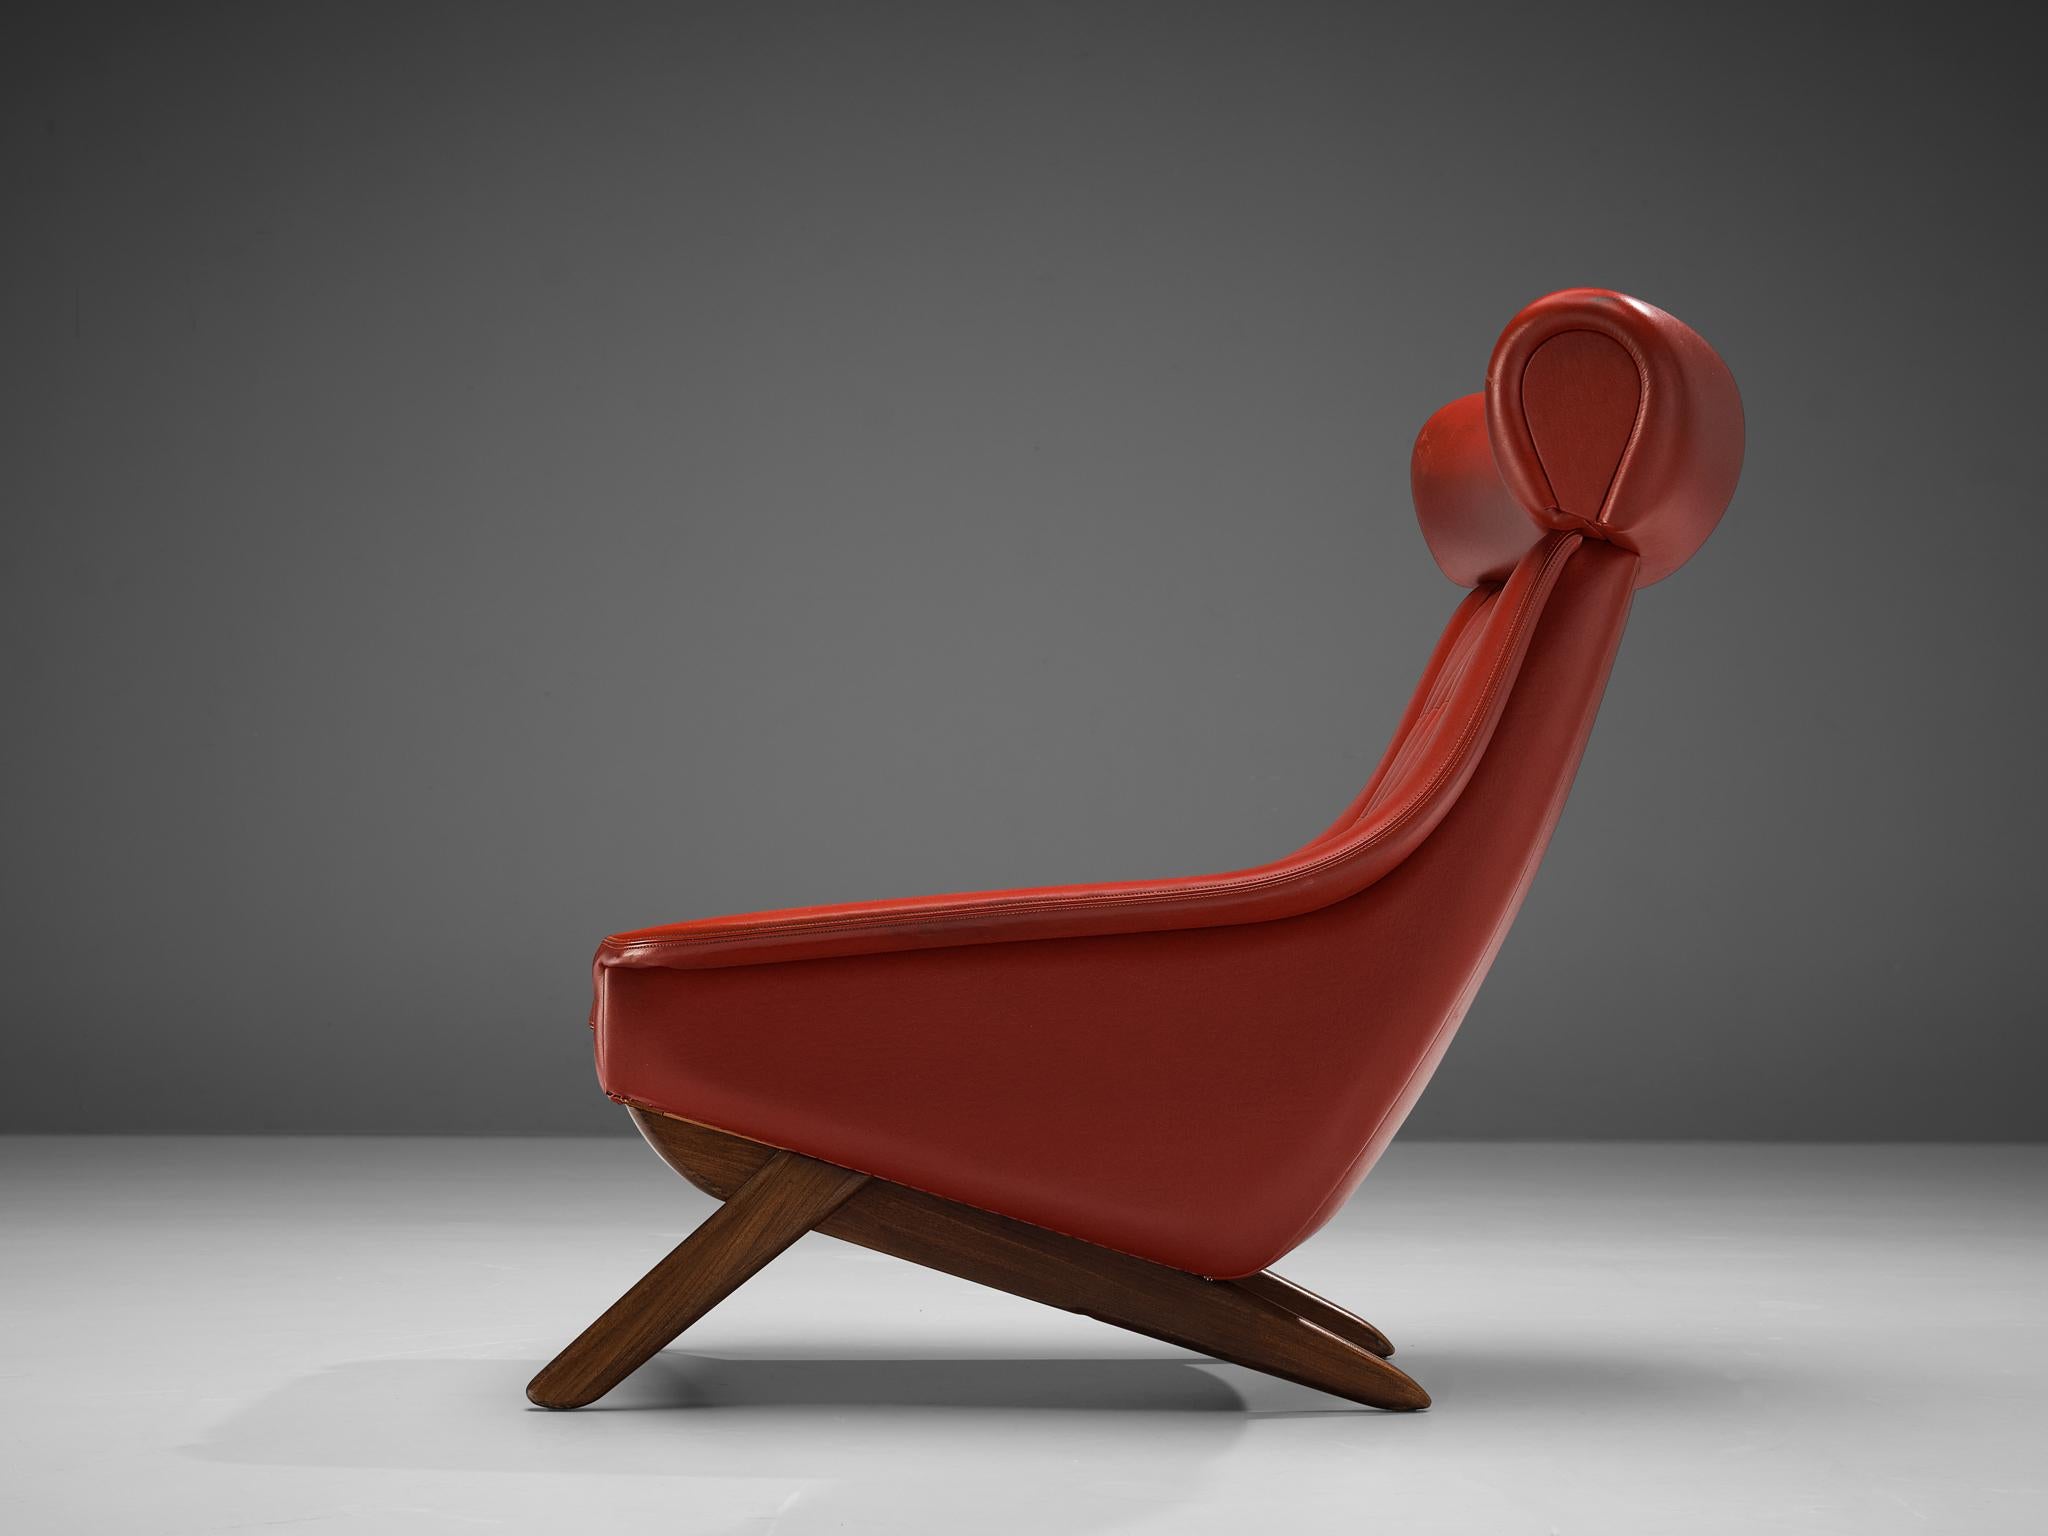 Illum Wikkelsø, 'Ox' lounge chair, leather,ette mahogany, Denmark 1960s.

Well-designed easy chair in red leatherette upholstery by Danish designer Illum Wikkelsø. This 'Ox Chair' shows some interesting details. For instance, the wide and large